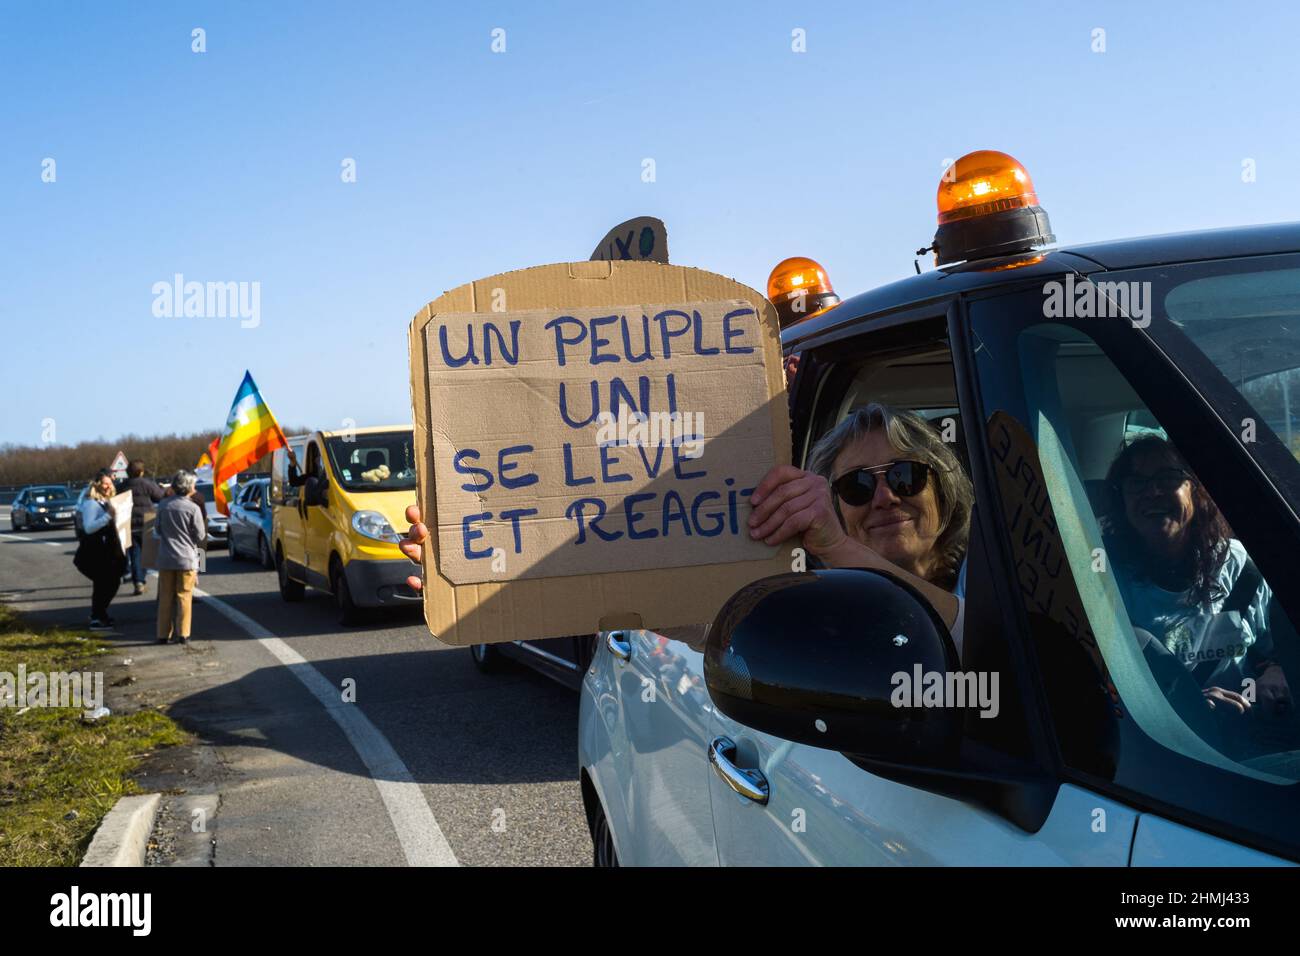 France, Montauban, 2022-02-10. A woman in a convoy car with a sign, A united people stands up and reacts. Passage of the Convoi de la Liberte at the Aussonne traffic circle in Montauban. For several days, anti health pass and anti-vax activists have been organizing road convoys to reach and blockade Paris on February 11. Movement of anger born among Canadian truck drivers against the vaccine pass. Photograph by Patricia Huchot-Boissier/ABACAPRESS.COM France, Montauban, 2022-02-10. Une femme dans une voiture du convoi avec une pancarte, Un peuple uni se leve et reagit. Passage du Convoi de la l Stock Photo